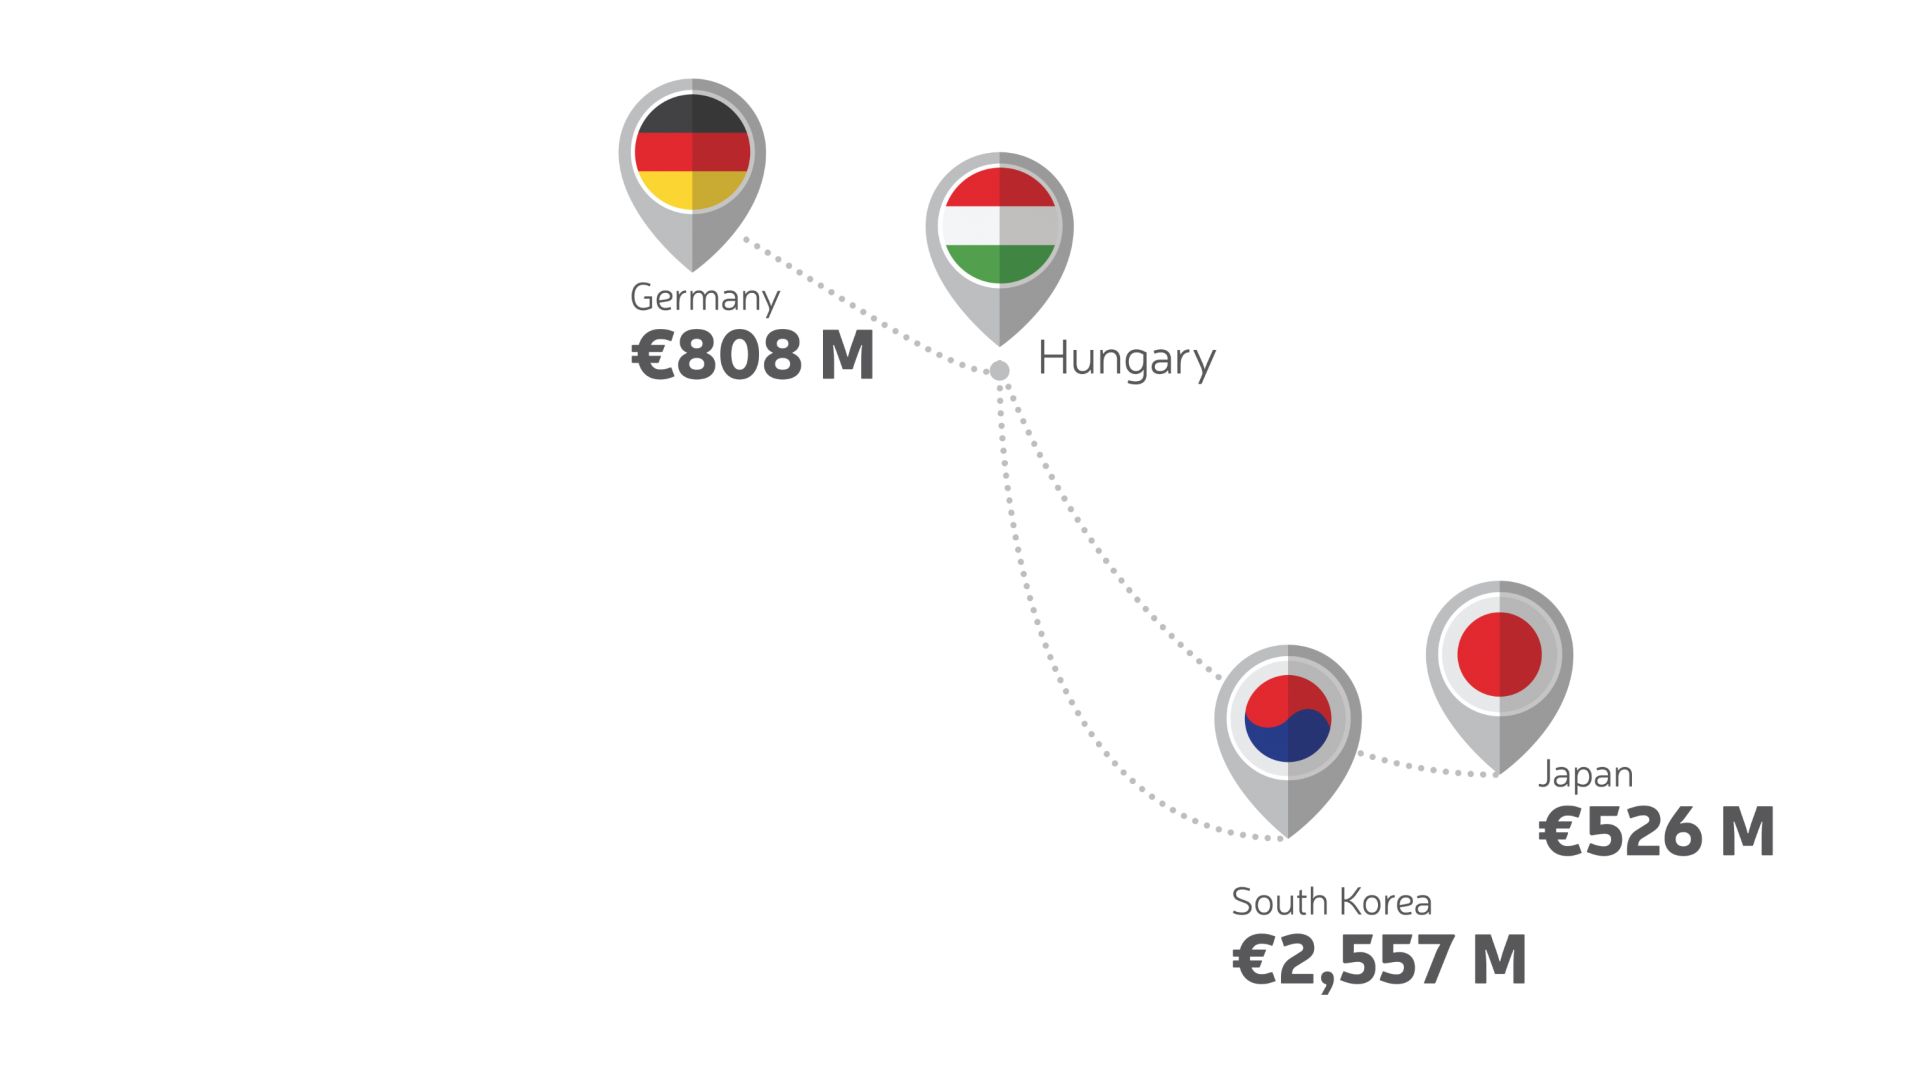 The top three countries of origin in terms of investment volume